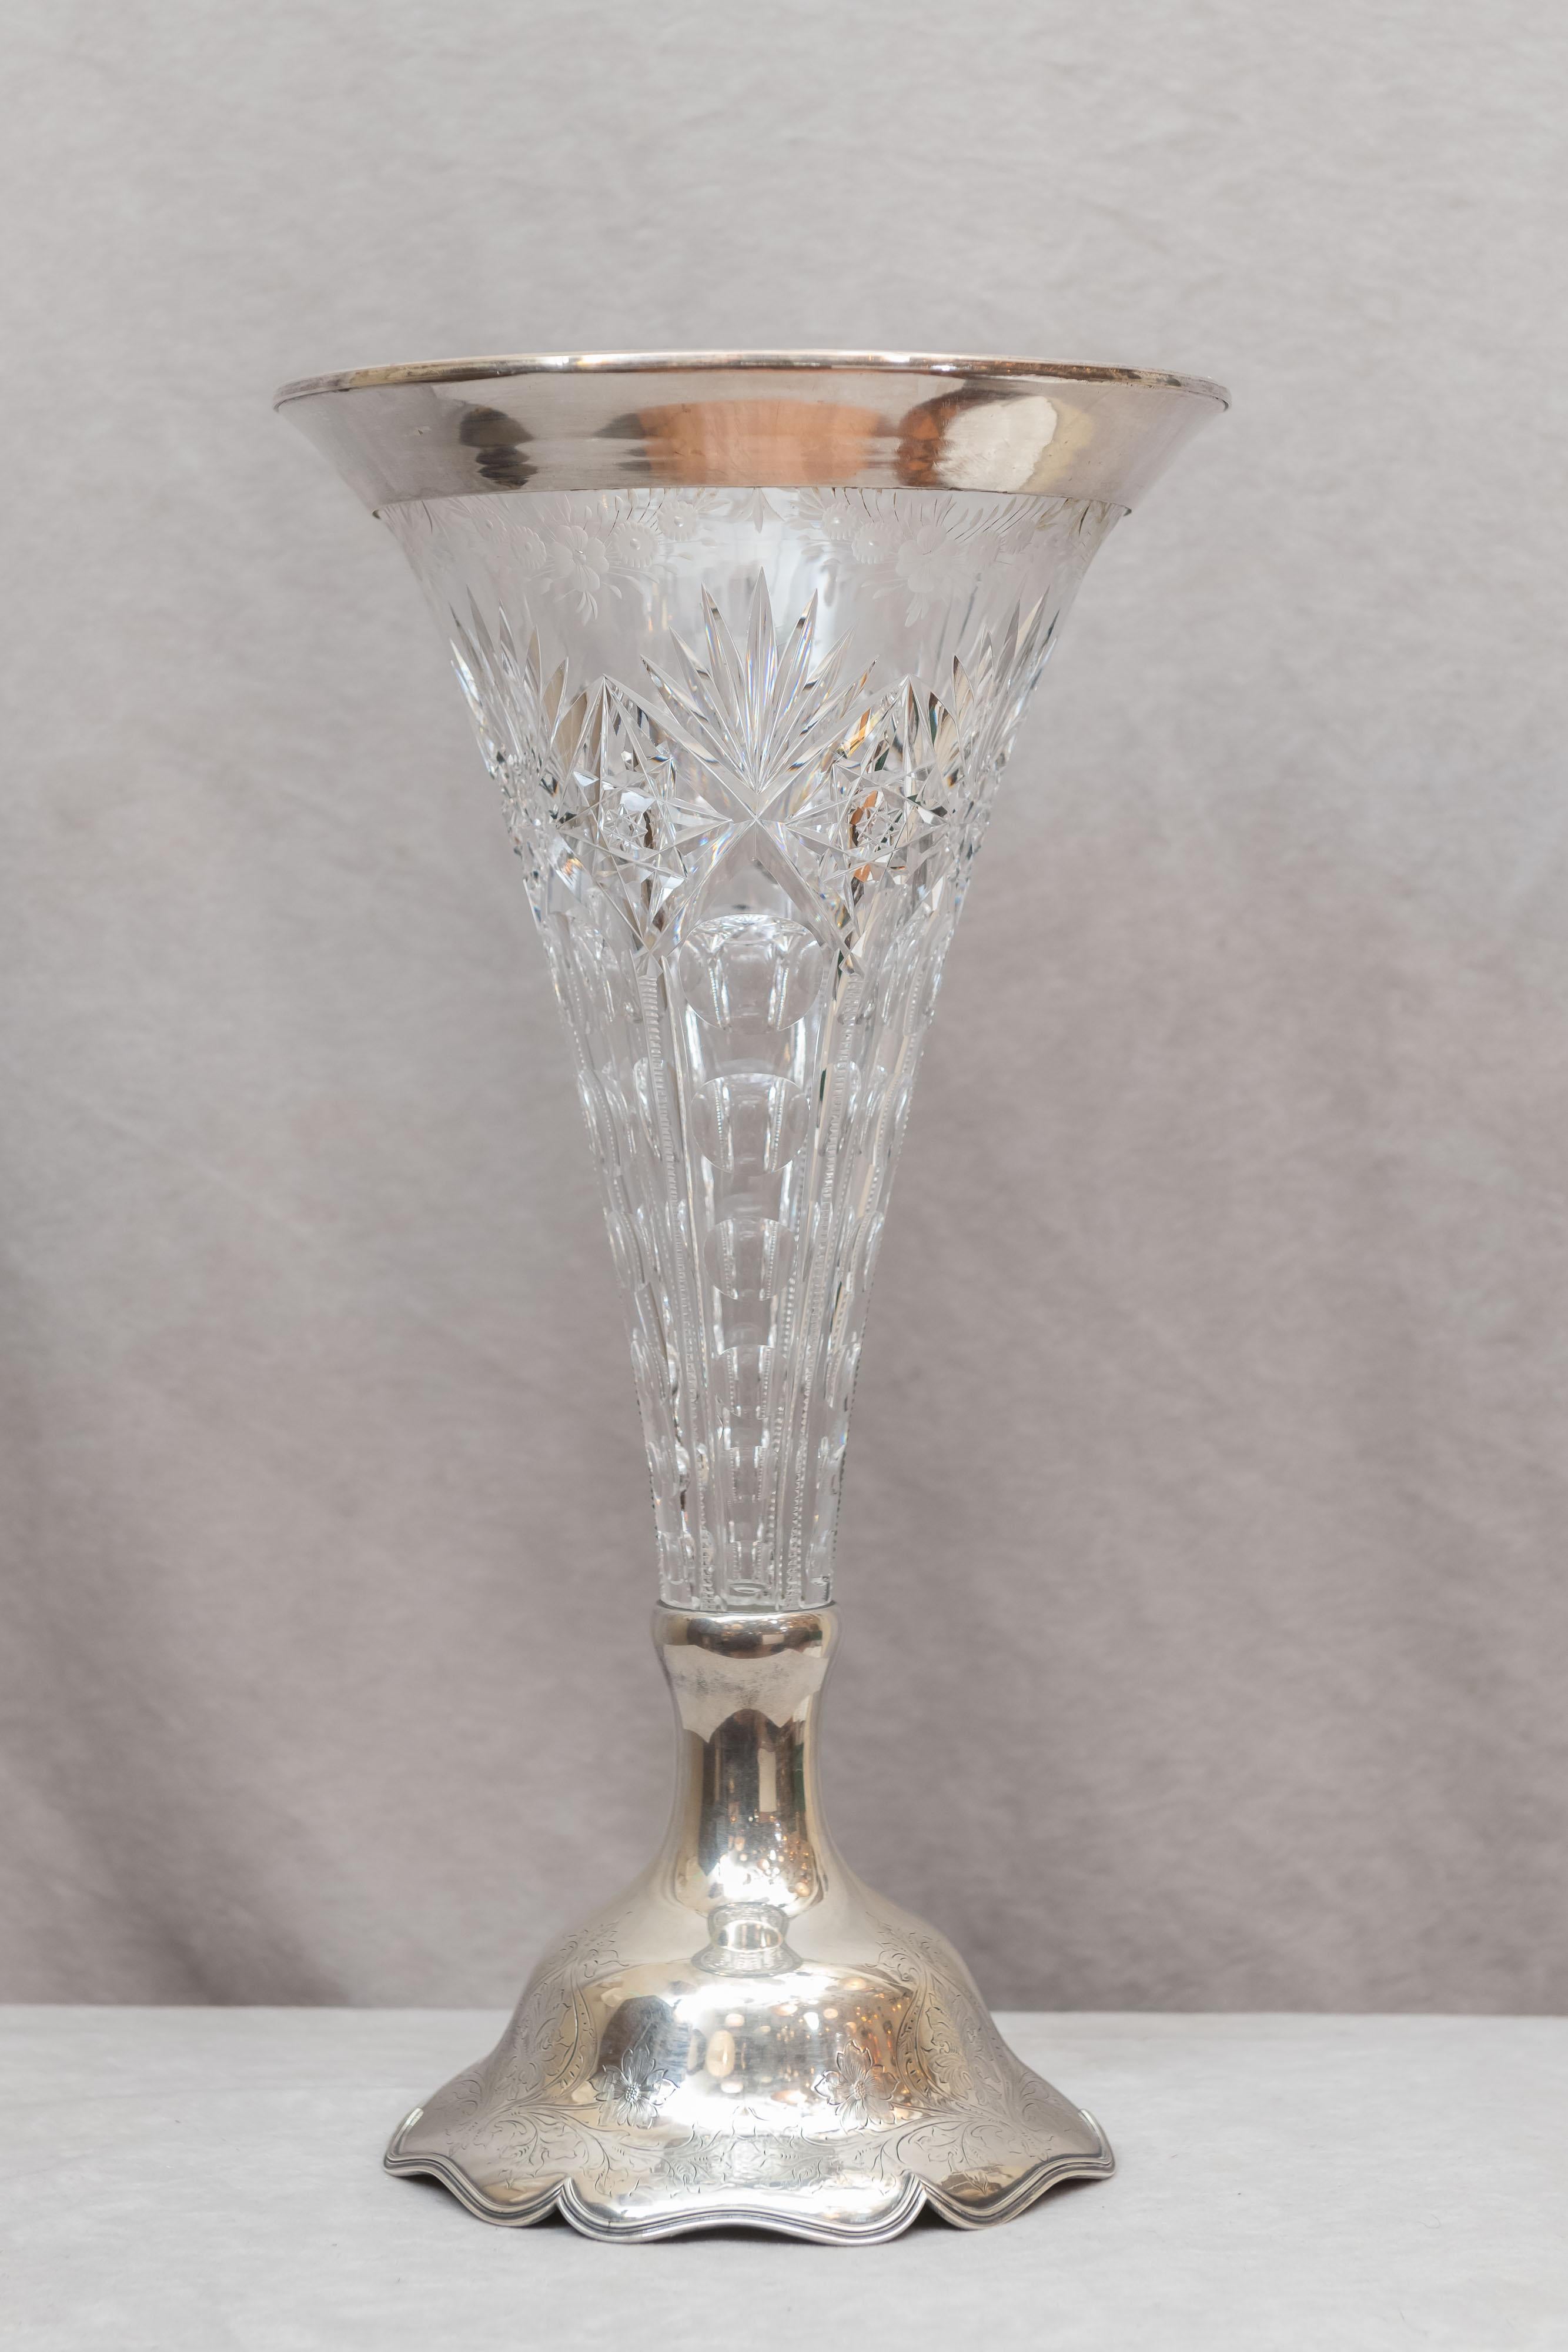 This very impressive vase will make any place in your home a place of importance. The glass is brilliant cut and the silver was made by one of the most respected makers of the time period, Shreve.
We felt every area of the glass for a chip, none.